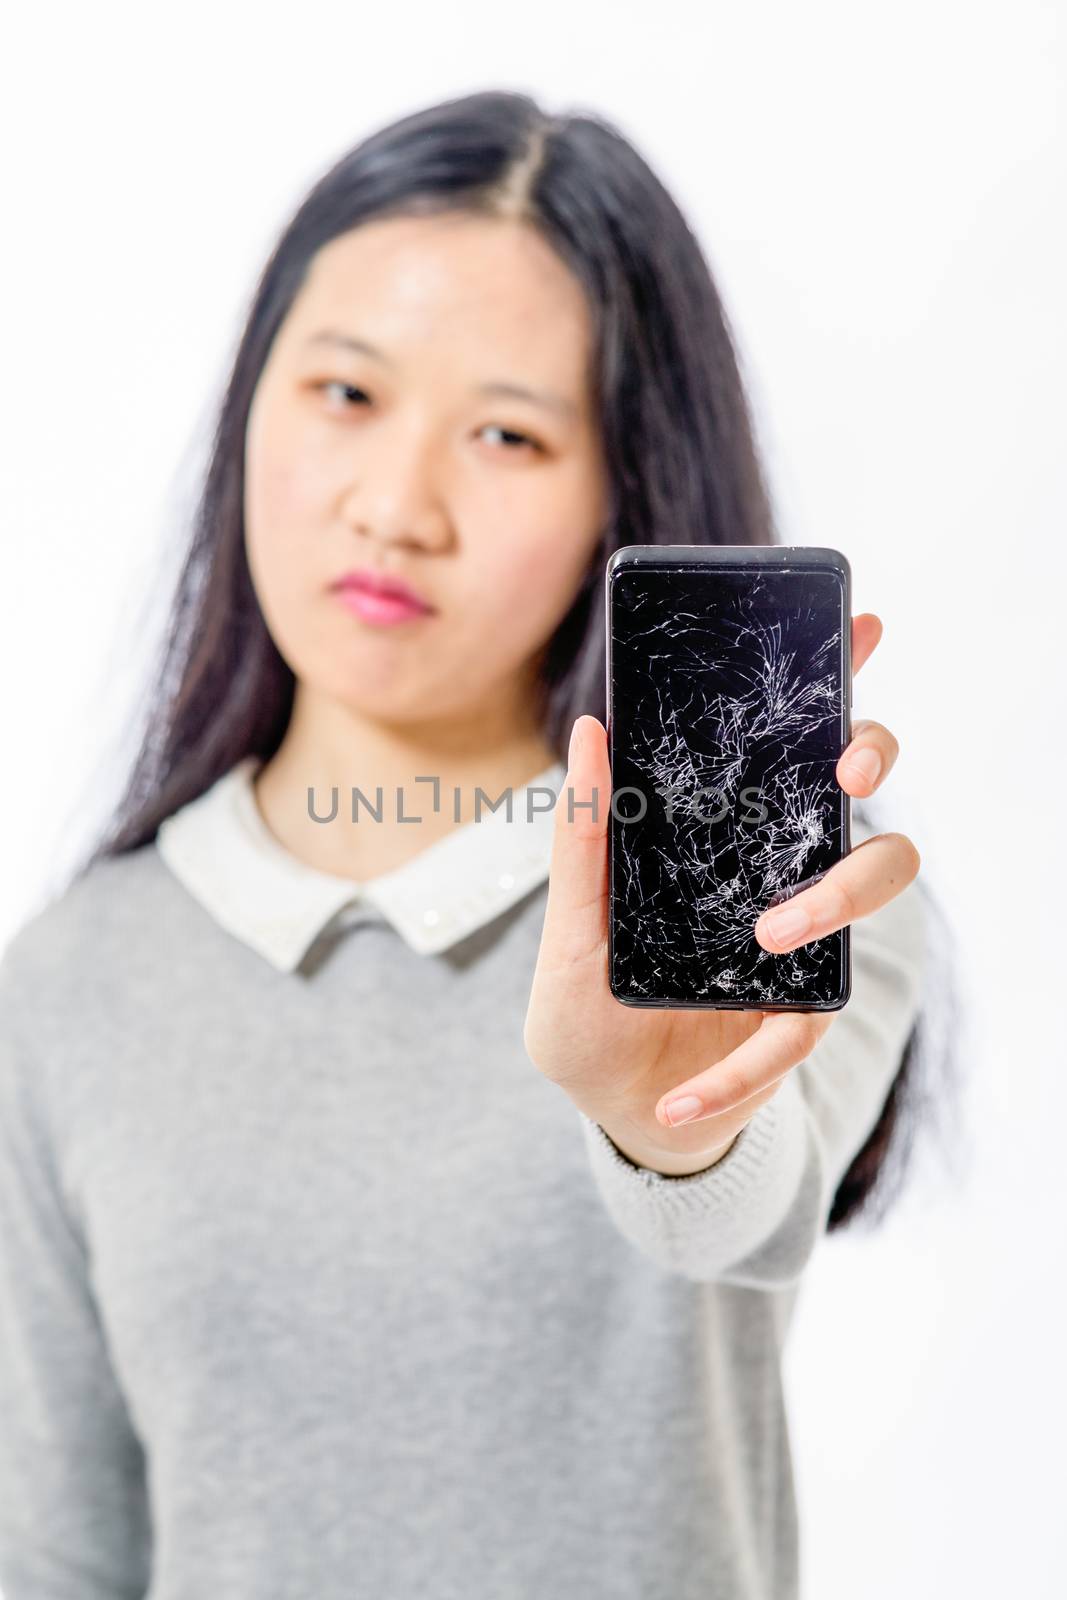 Upset Chinese schoolgirl with cracked cellphone